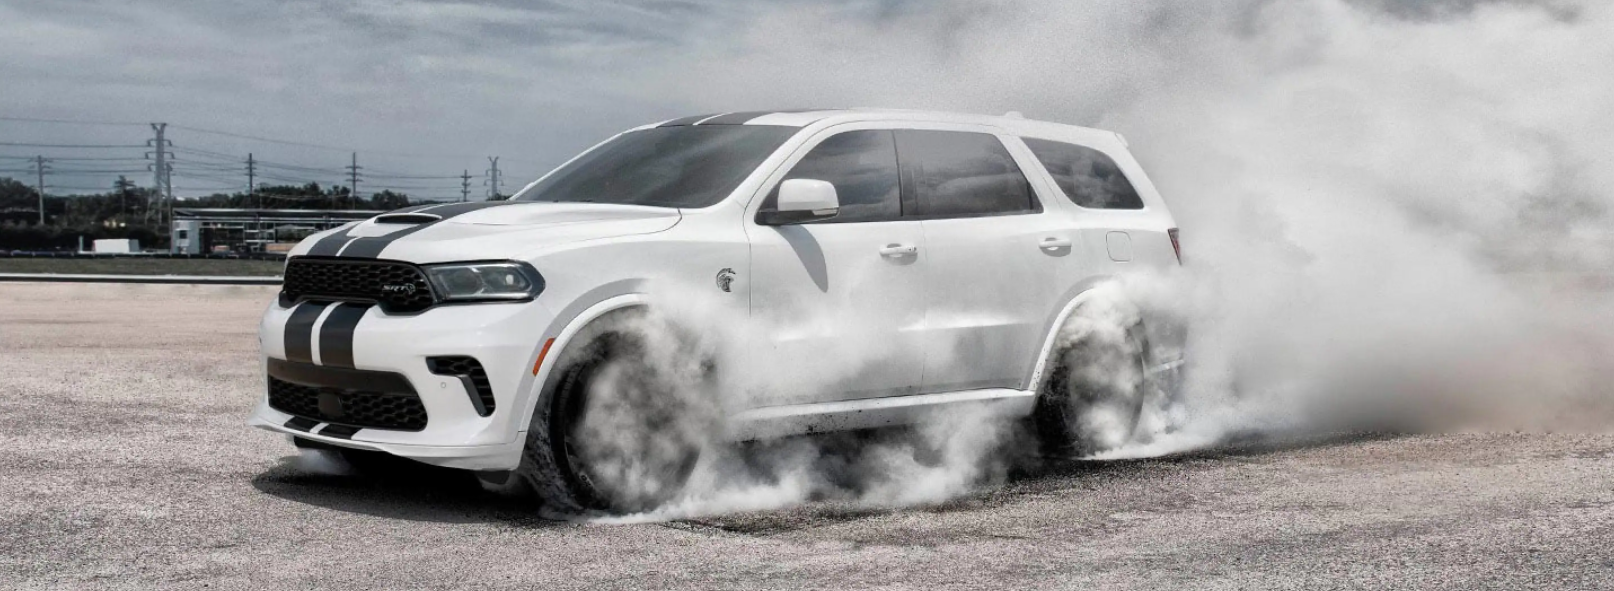 The 2021 Dodge Durango SRT Hellcat muscle three-row SUV in white with a hood vent and stripes as tires spin and generate smoke